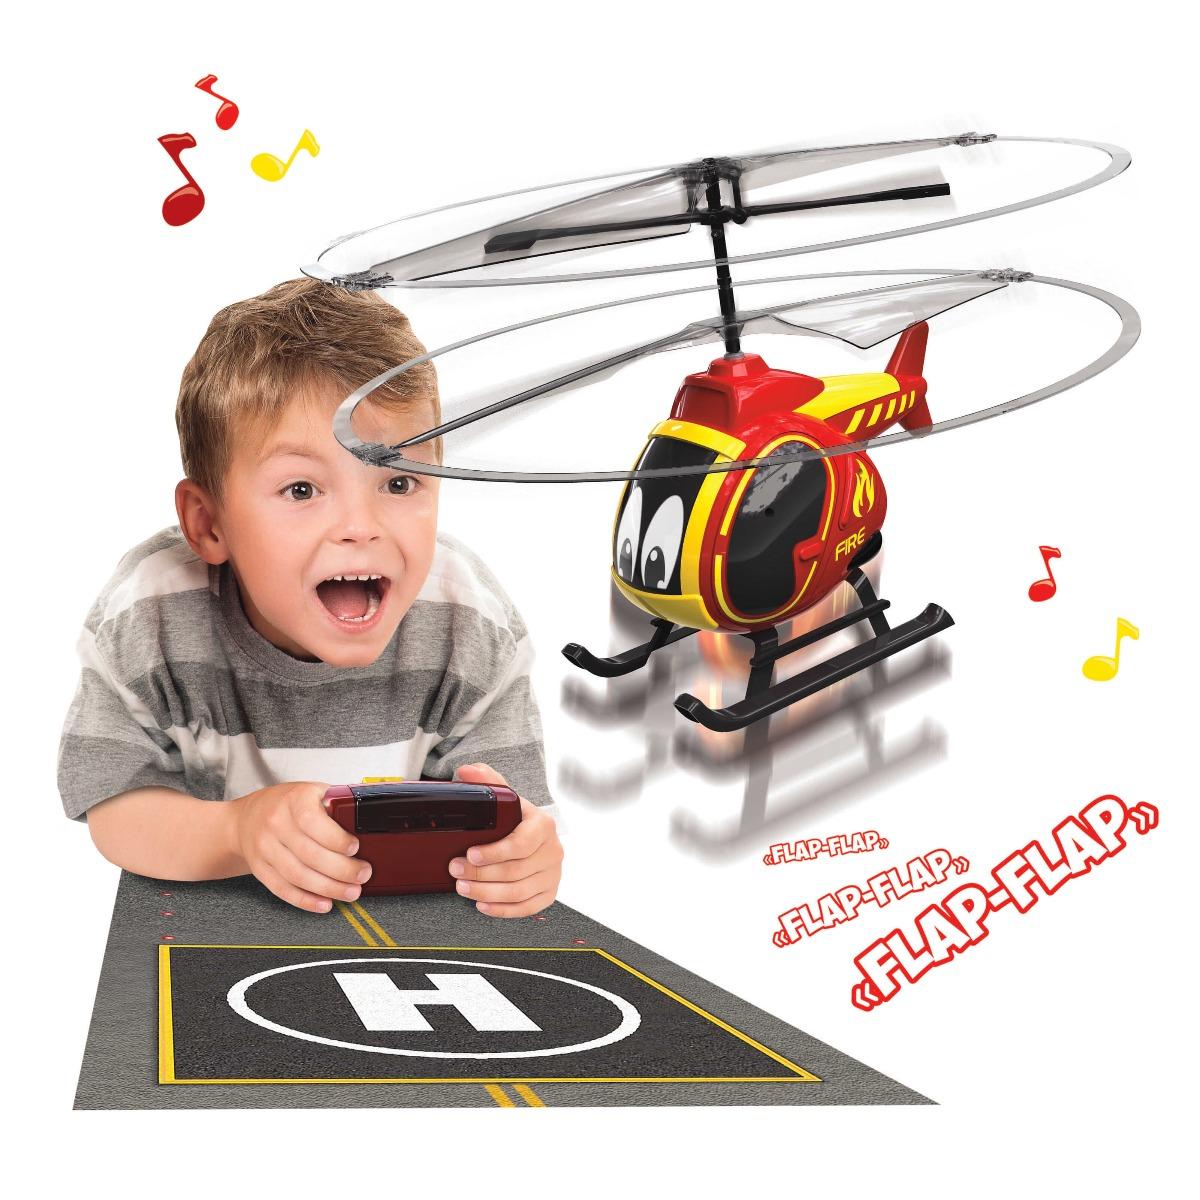 Silverlit My First Helicopter: Safe and Affordable Helicopter for Beginners